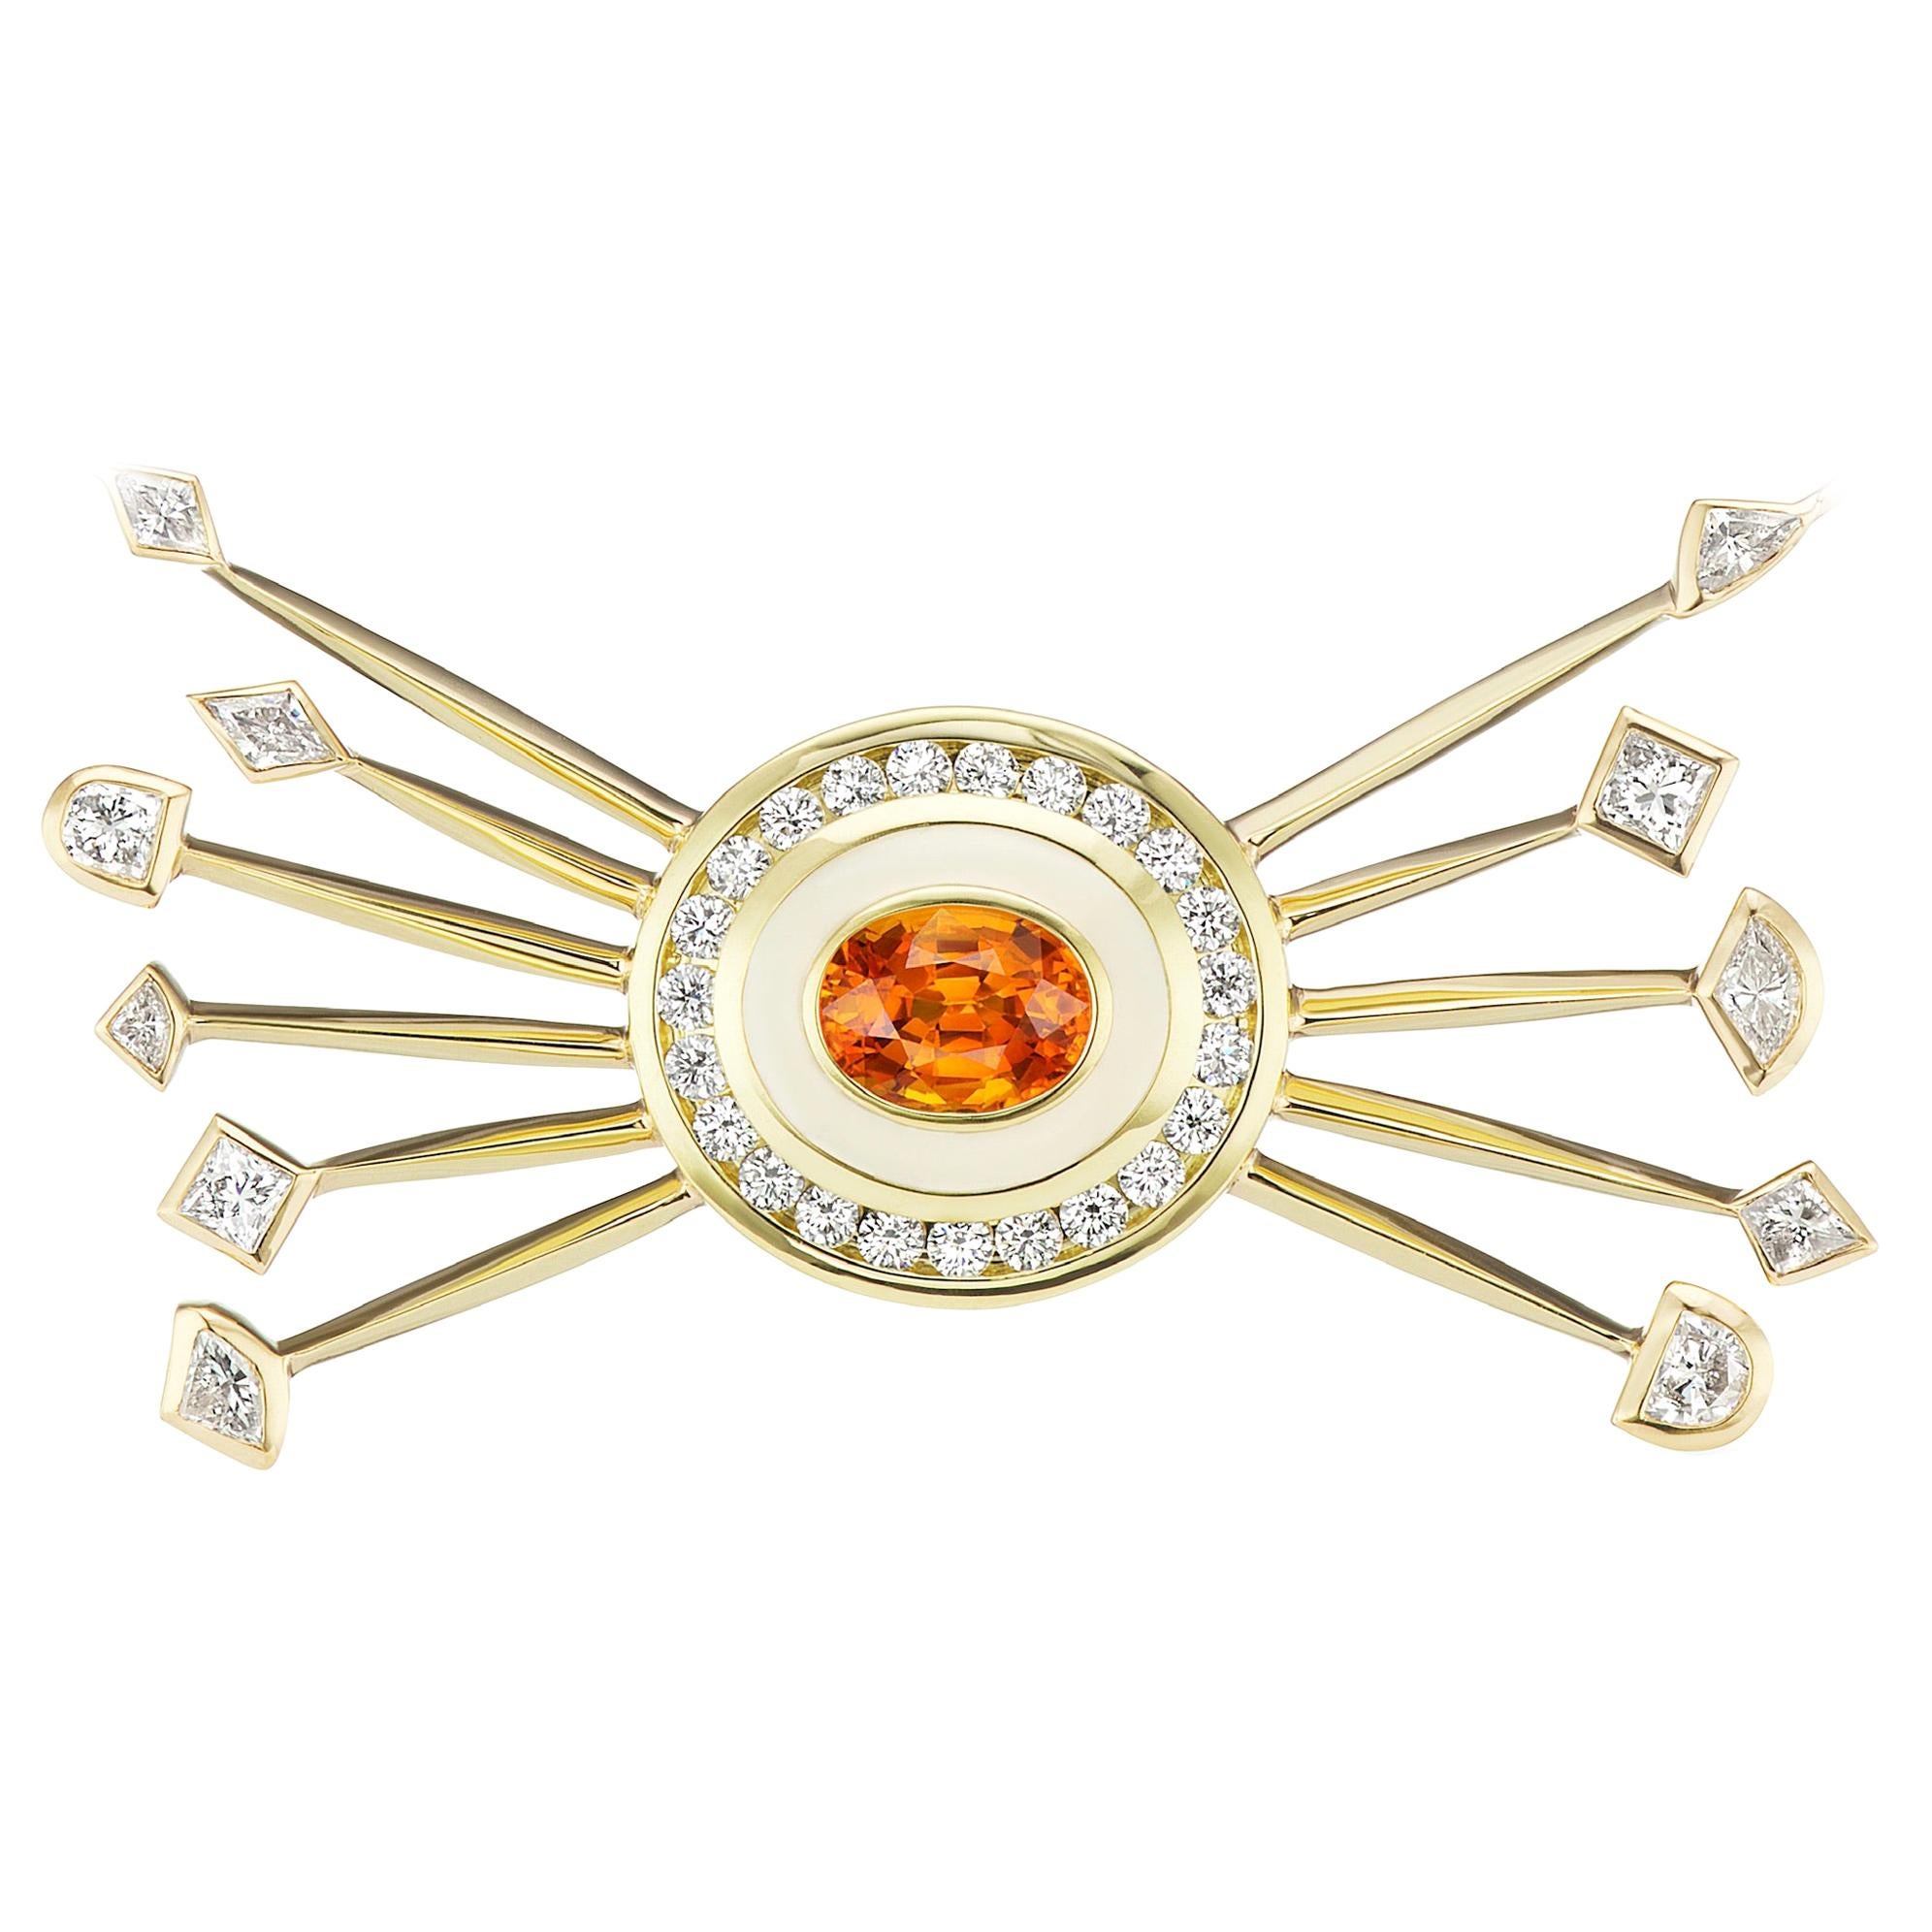 Museum Series Satellite Necklace with Diamonds and an Orange Sapphire